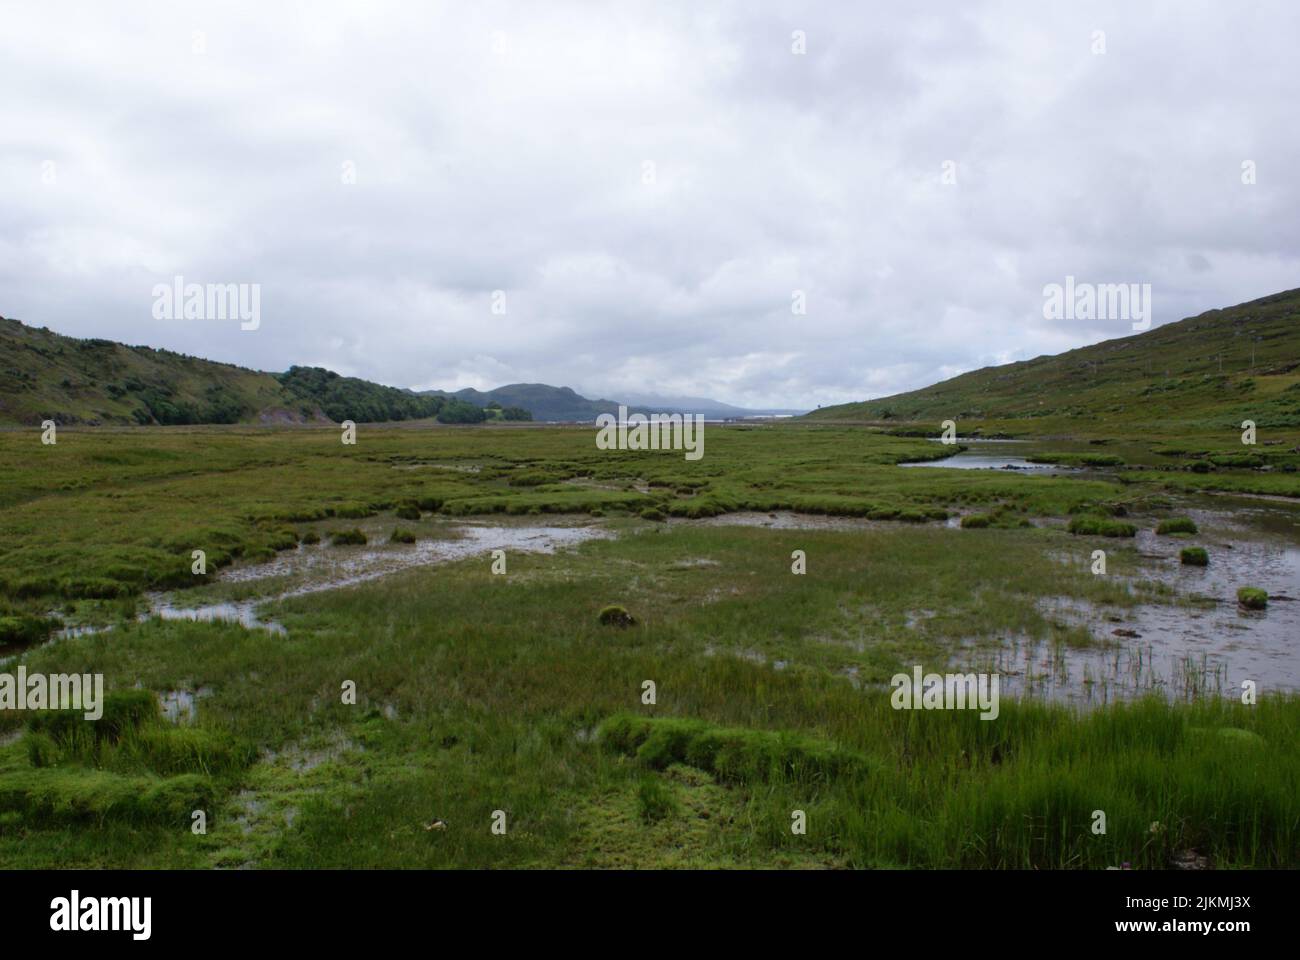 A beautiful view of green landscape with water puddles under a cloudy sky in Scotland Stock Photo